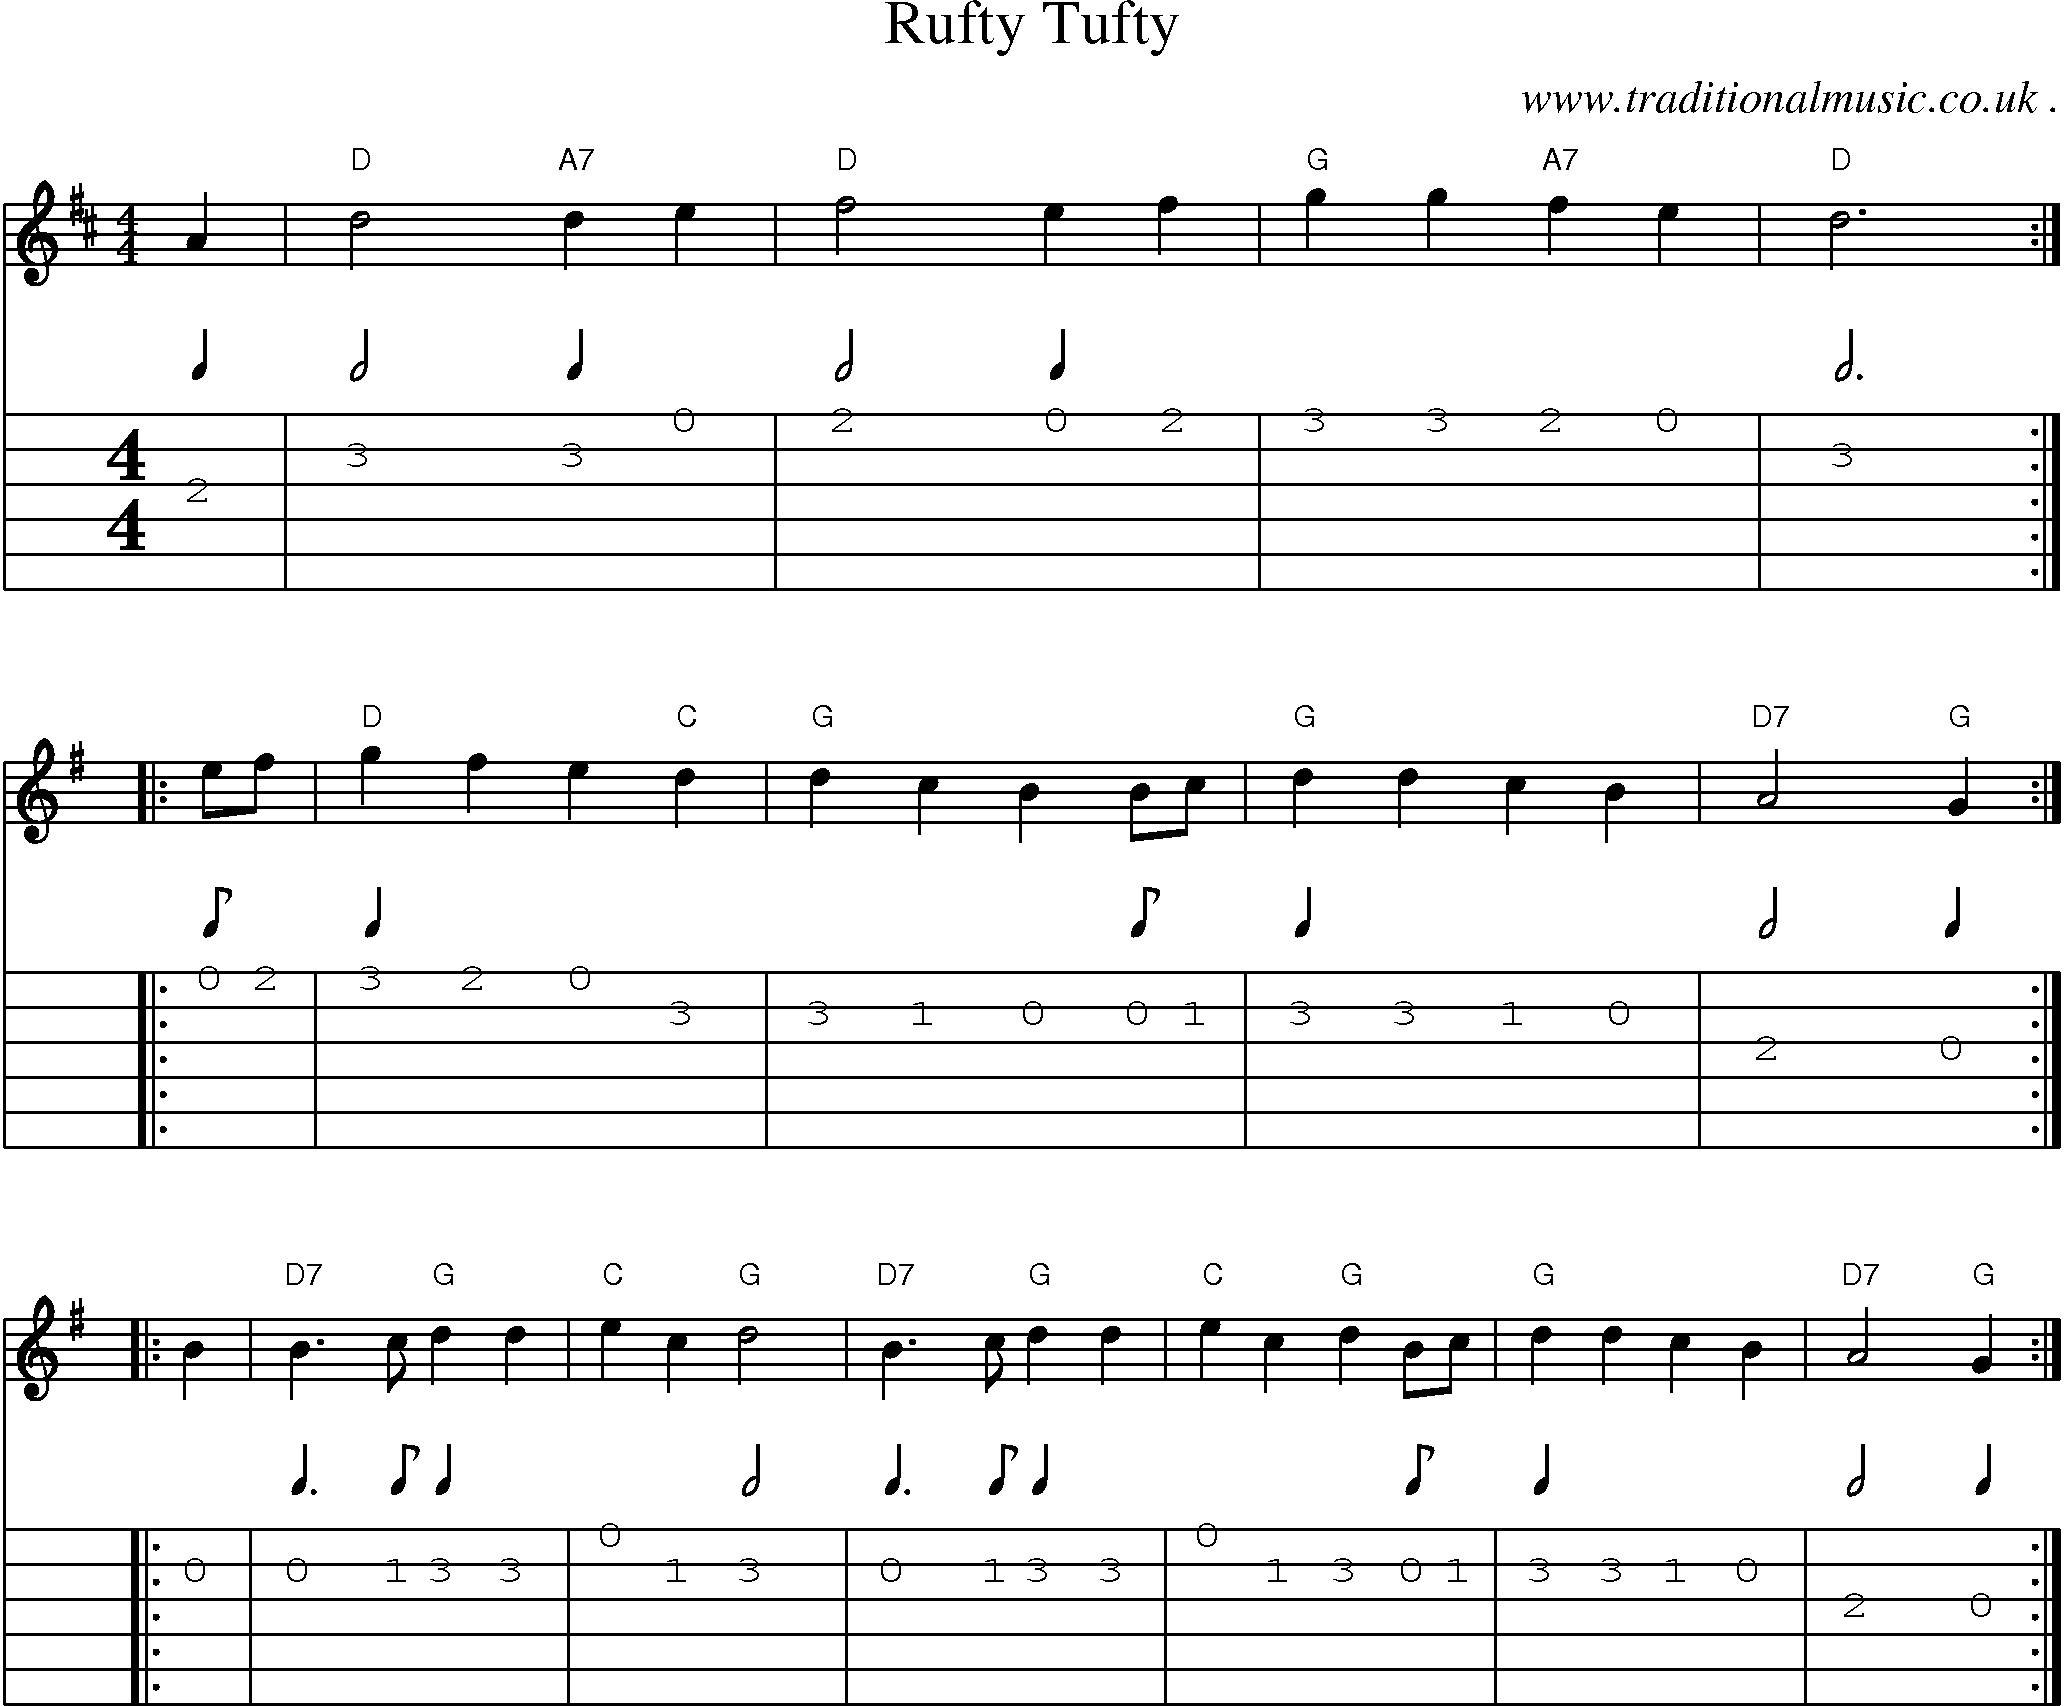 Music Score and Guitar Tabs for Rufty Tufty